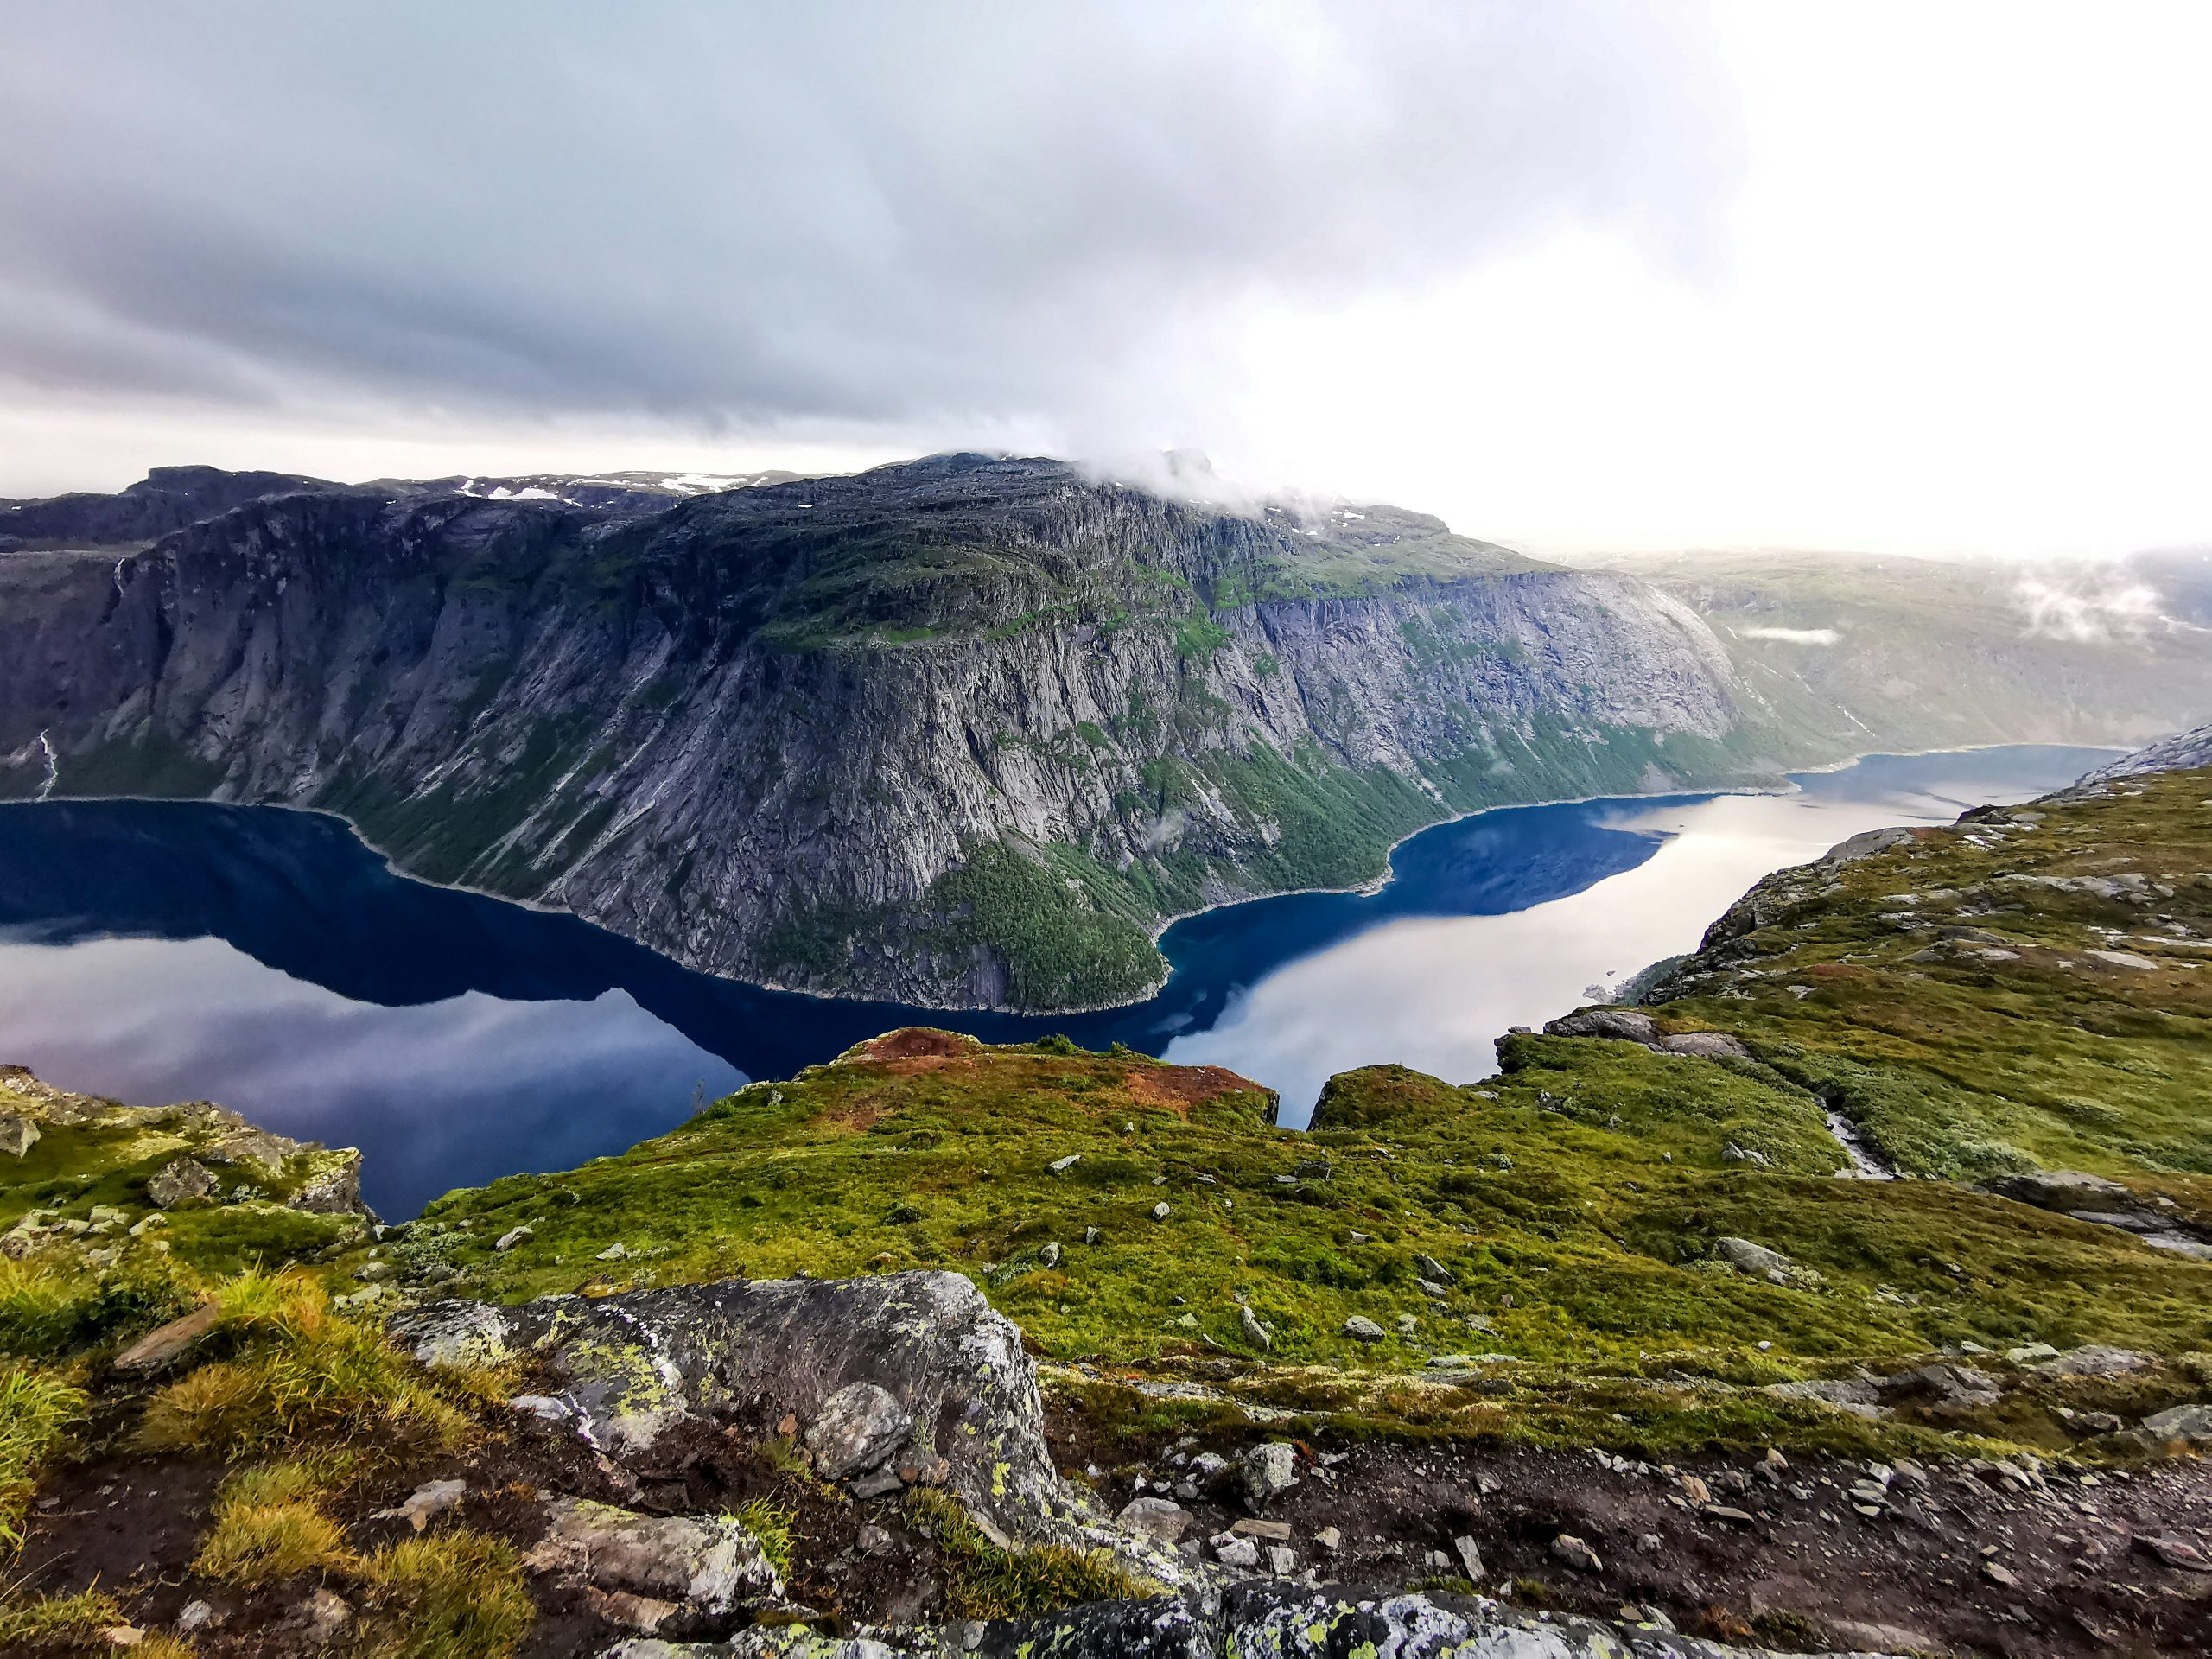 explore the breathtaking fjords with deep, crystalline waters and towering cliffs, and immerse yourself in the stunning natural beauty of these majestic landscapes.